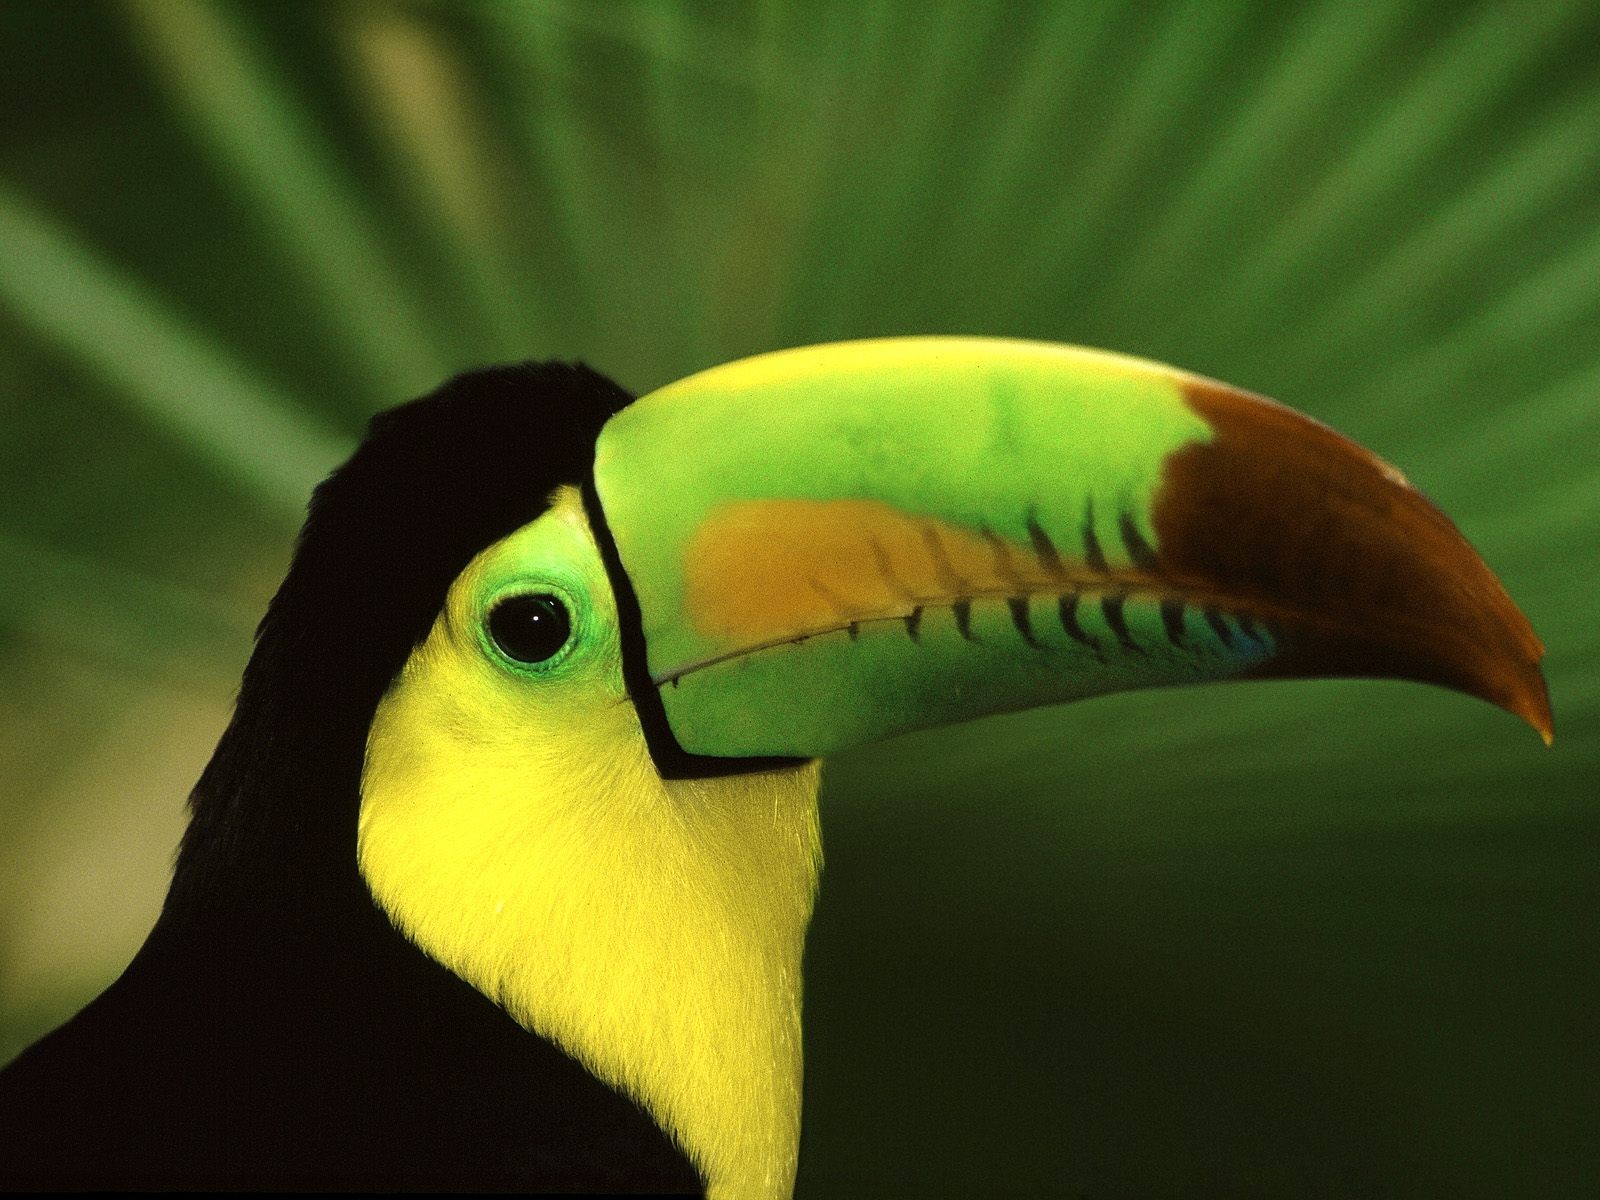 Colorful Toucan bird perched on a branch